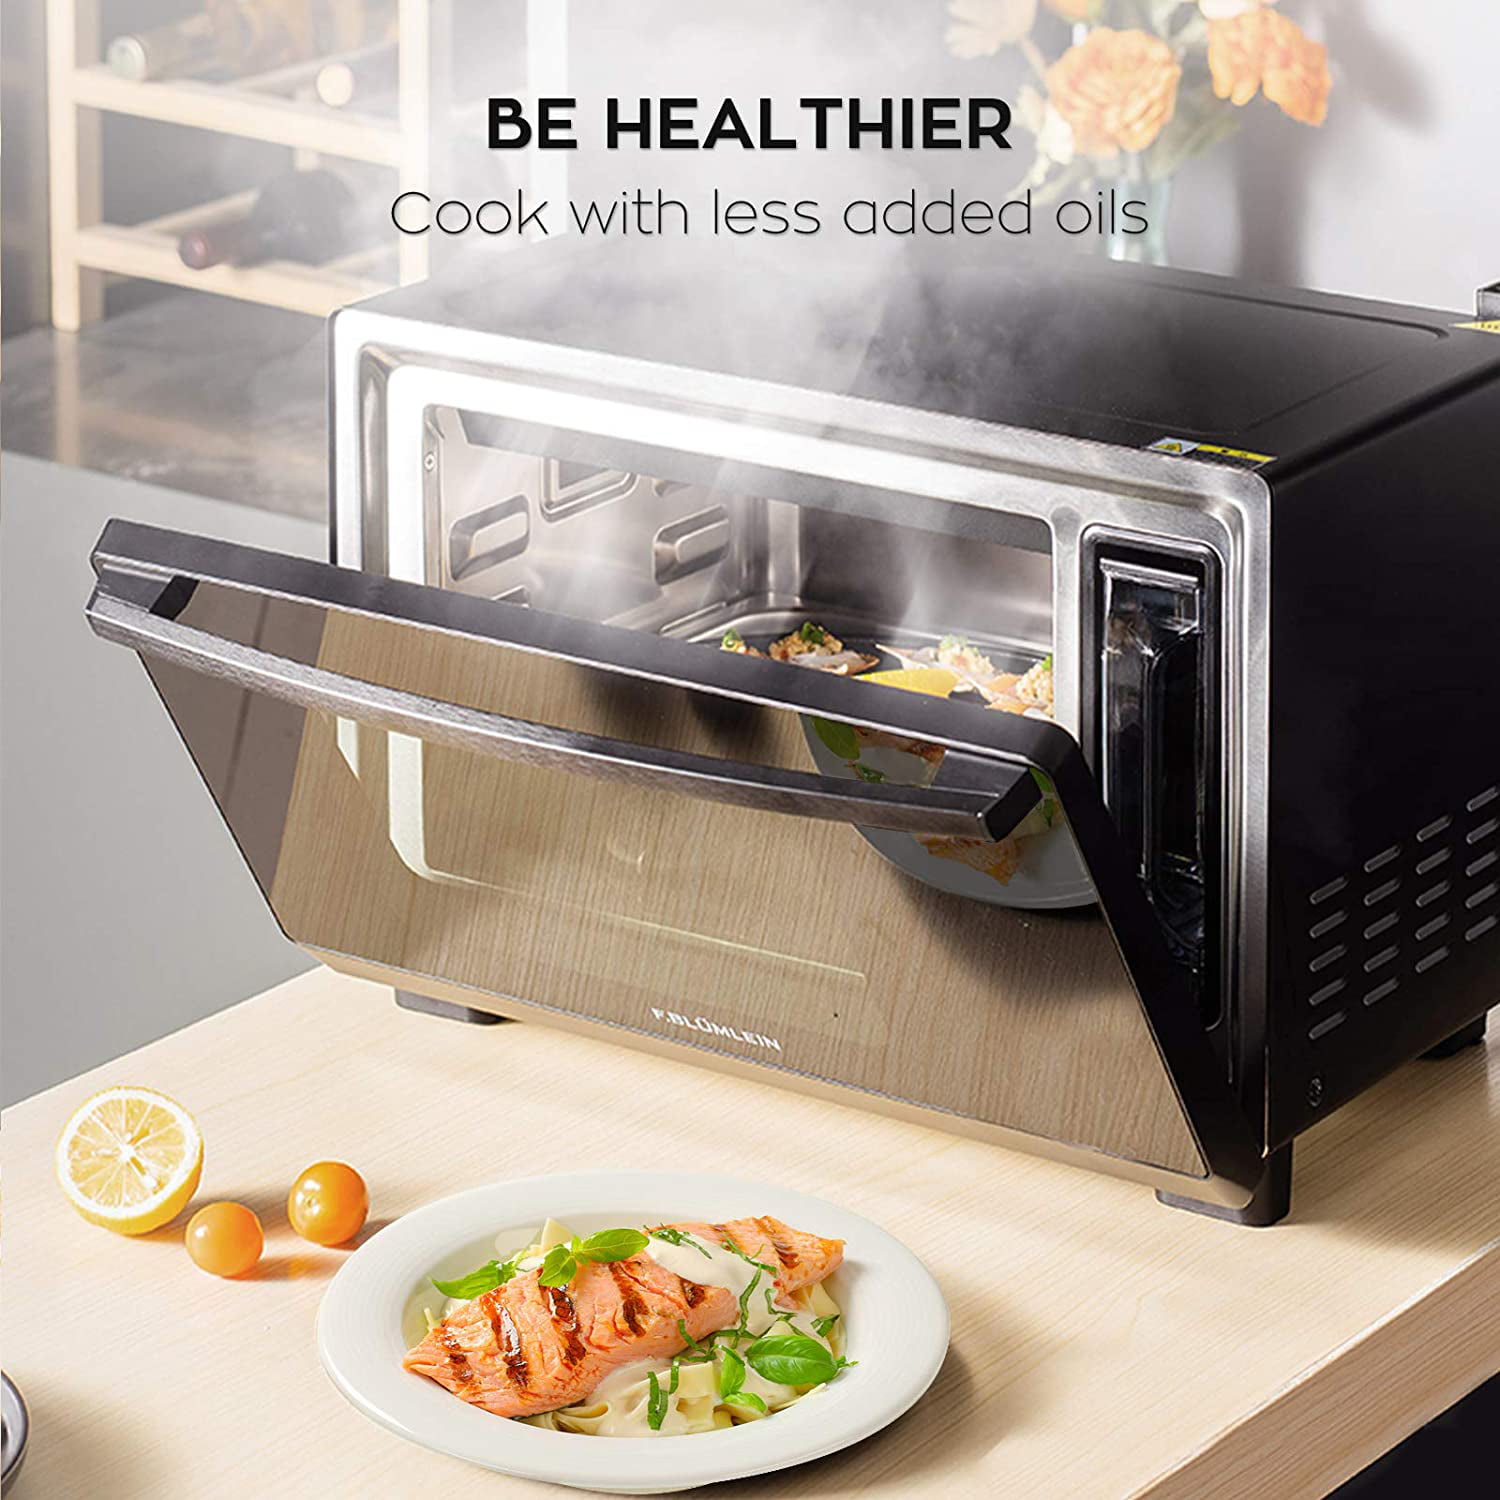 Feast on a great roast with the #IFB 20 L Convection #Microwave #Oven. It's  Deodorizer feature kee…